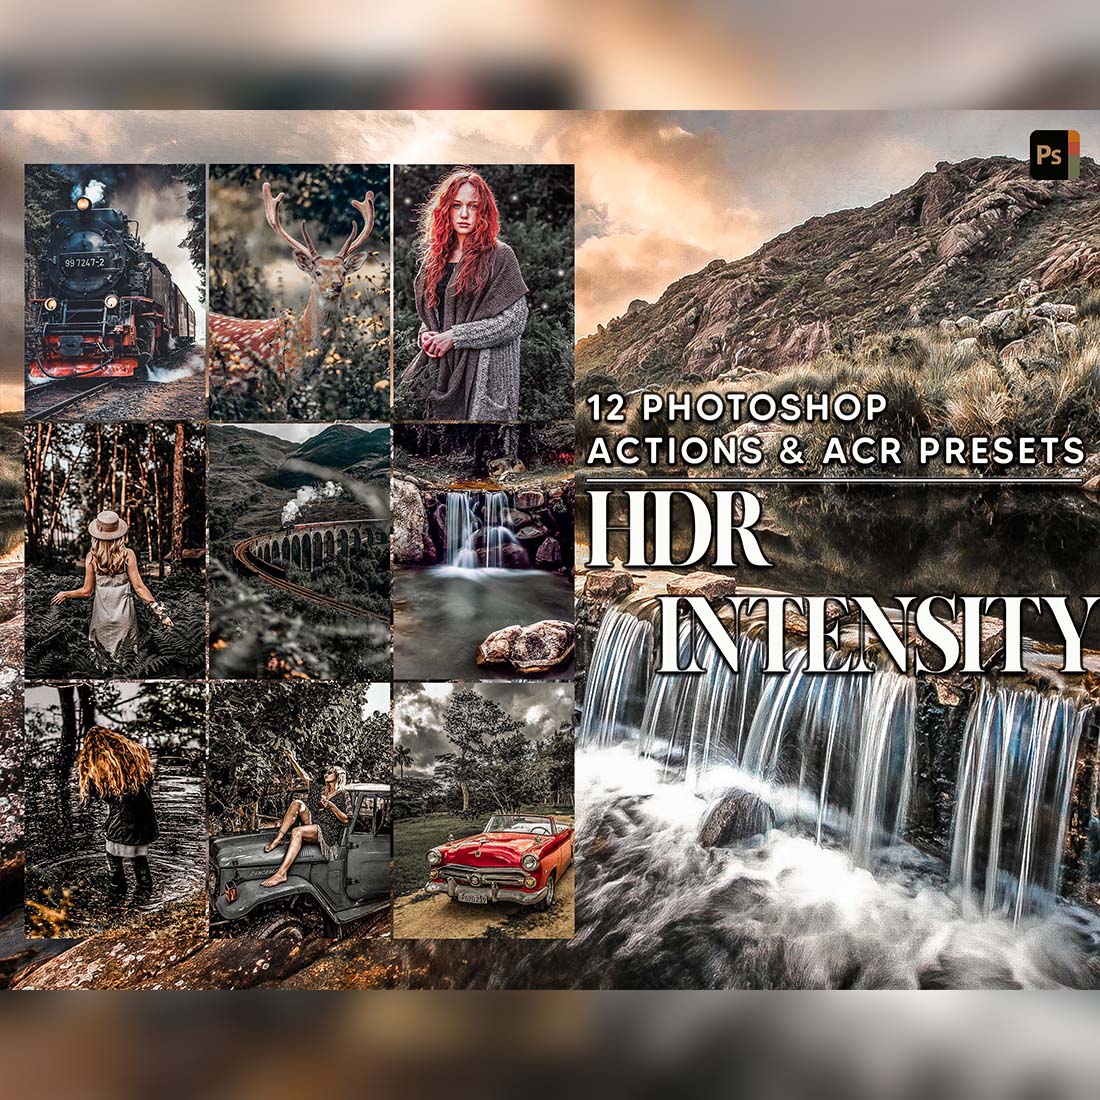 12 HDR Intensity, Moody Sharp Ps Action, Harsh ACR Preset, Forest Ps Filter, Landscape Portrait And Lifestyle Theme For Instagram, Blogger cover image.